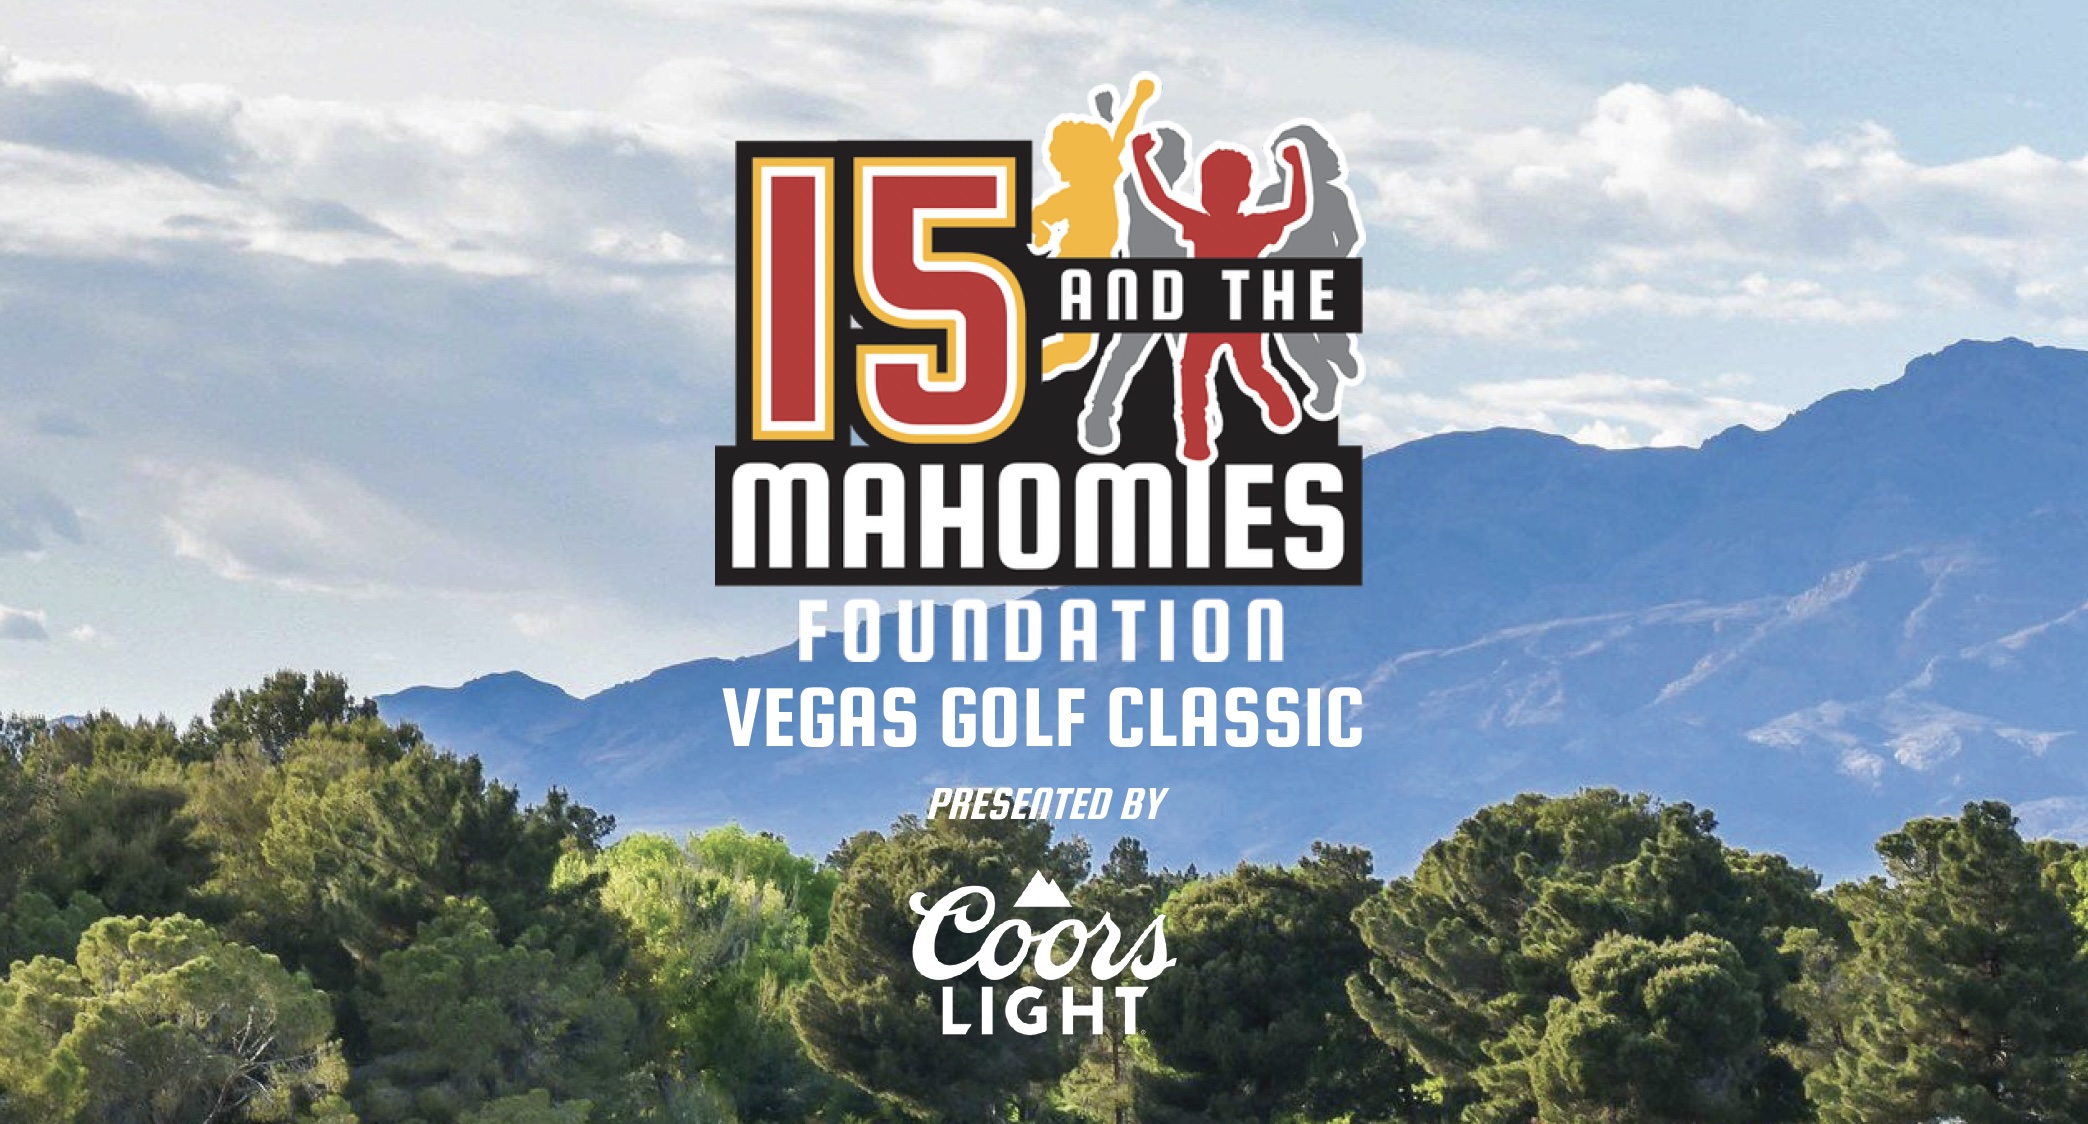 The Patrick Mahomes 15 and the Mahomies Foundation Vegas Golf Classic